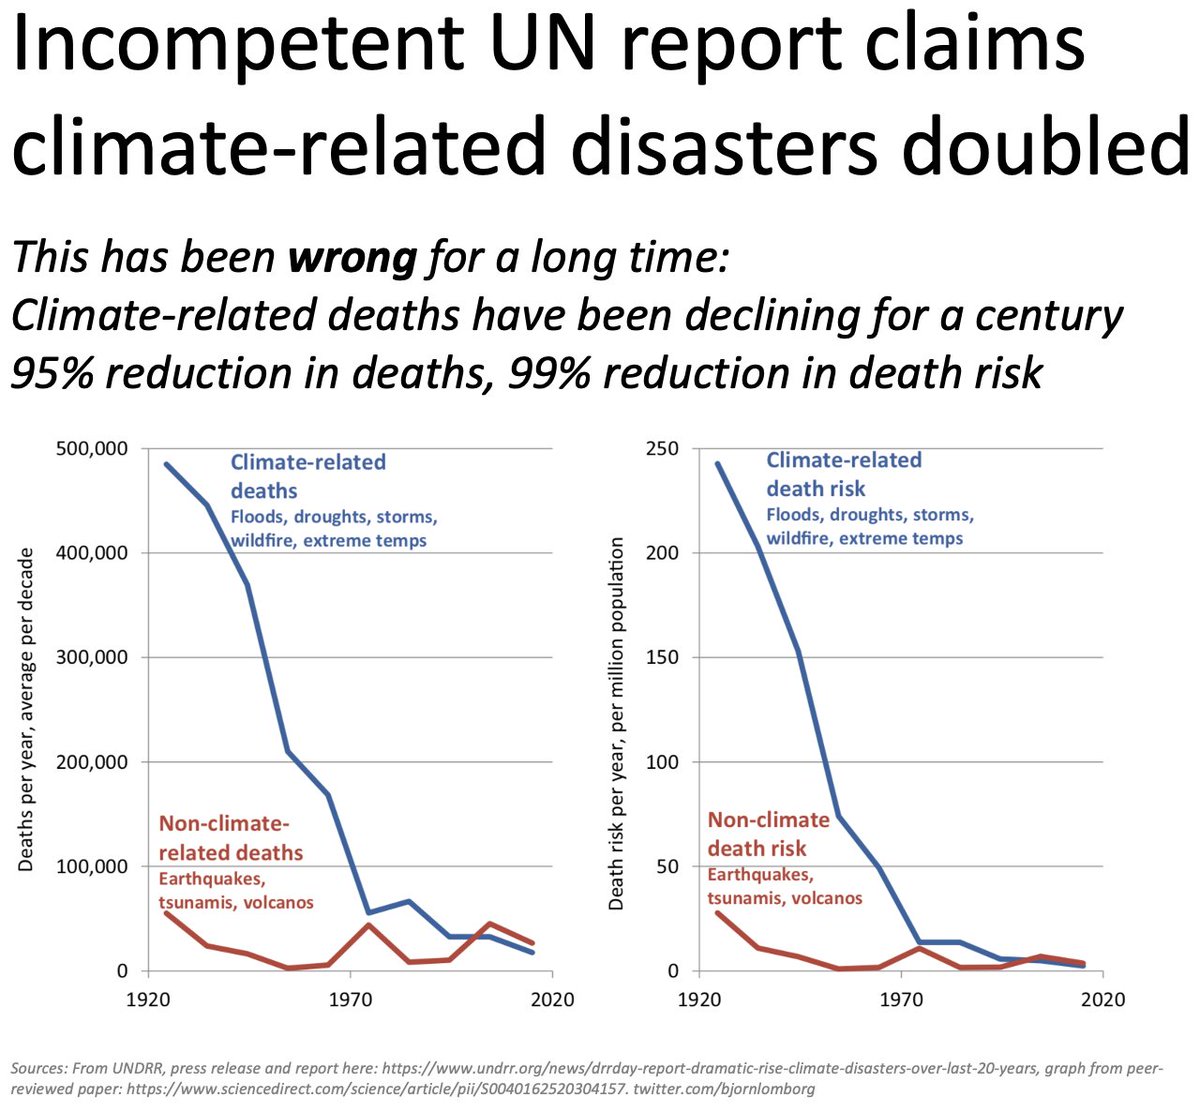 Known for a long time that actual death from climate-related disasters is not increasingDeath from climate-related disasters has declined 95%Death risk from climate-related disasters has declined 99%Leads to *very* different understanding of world https://www.sciencedirect.com/science/article/pii/S0040162520304157